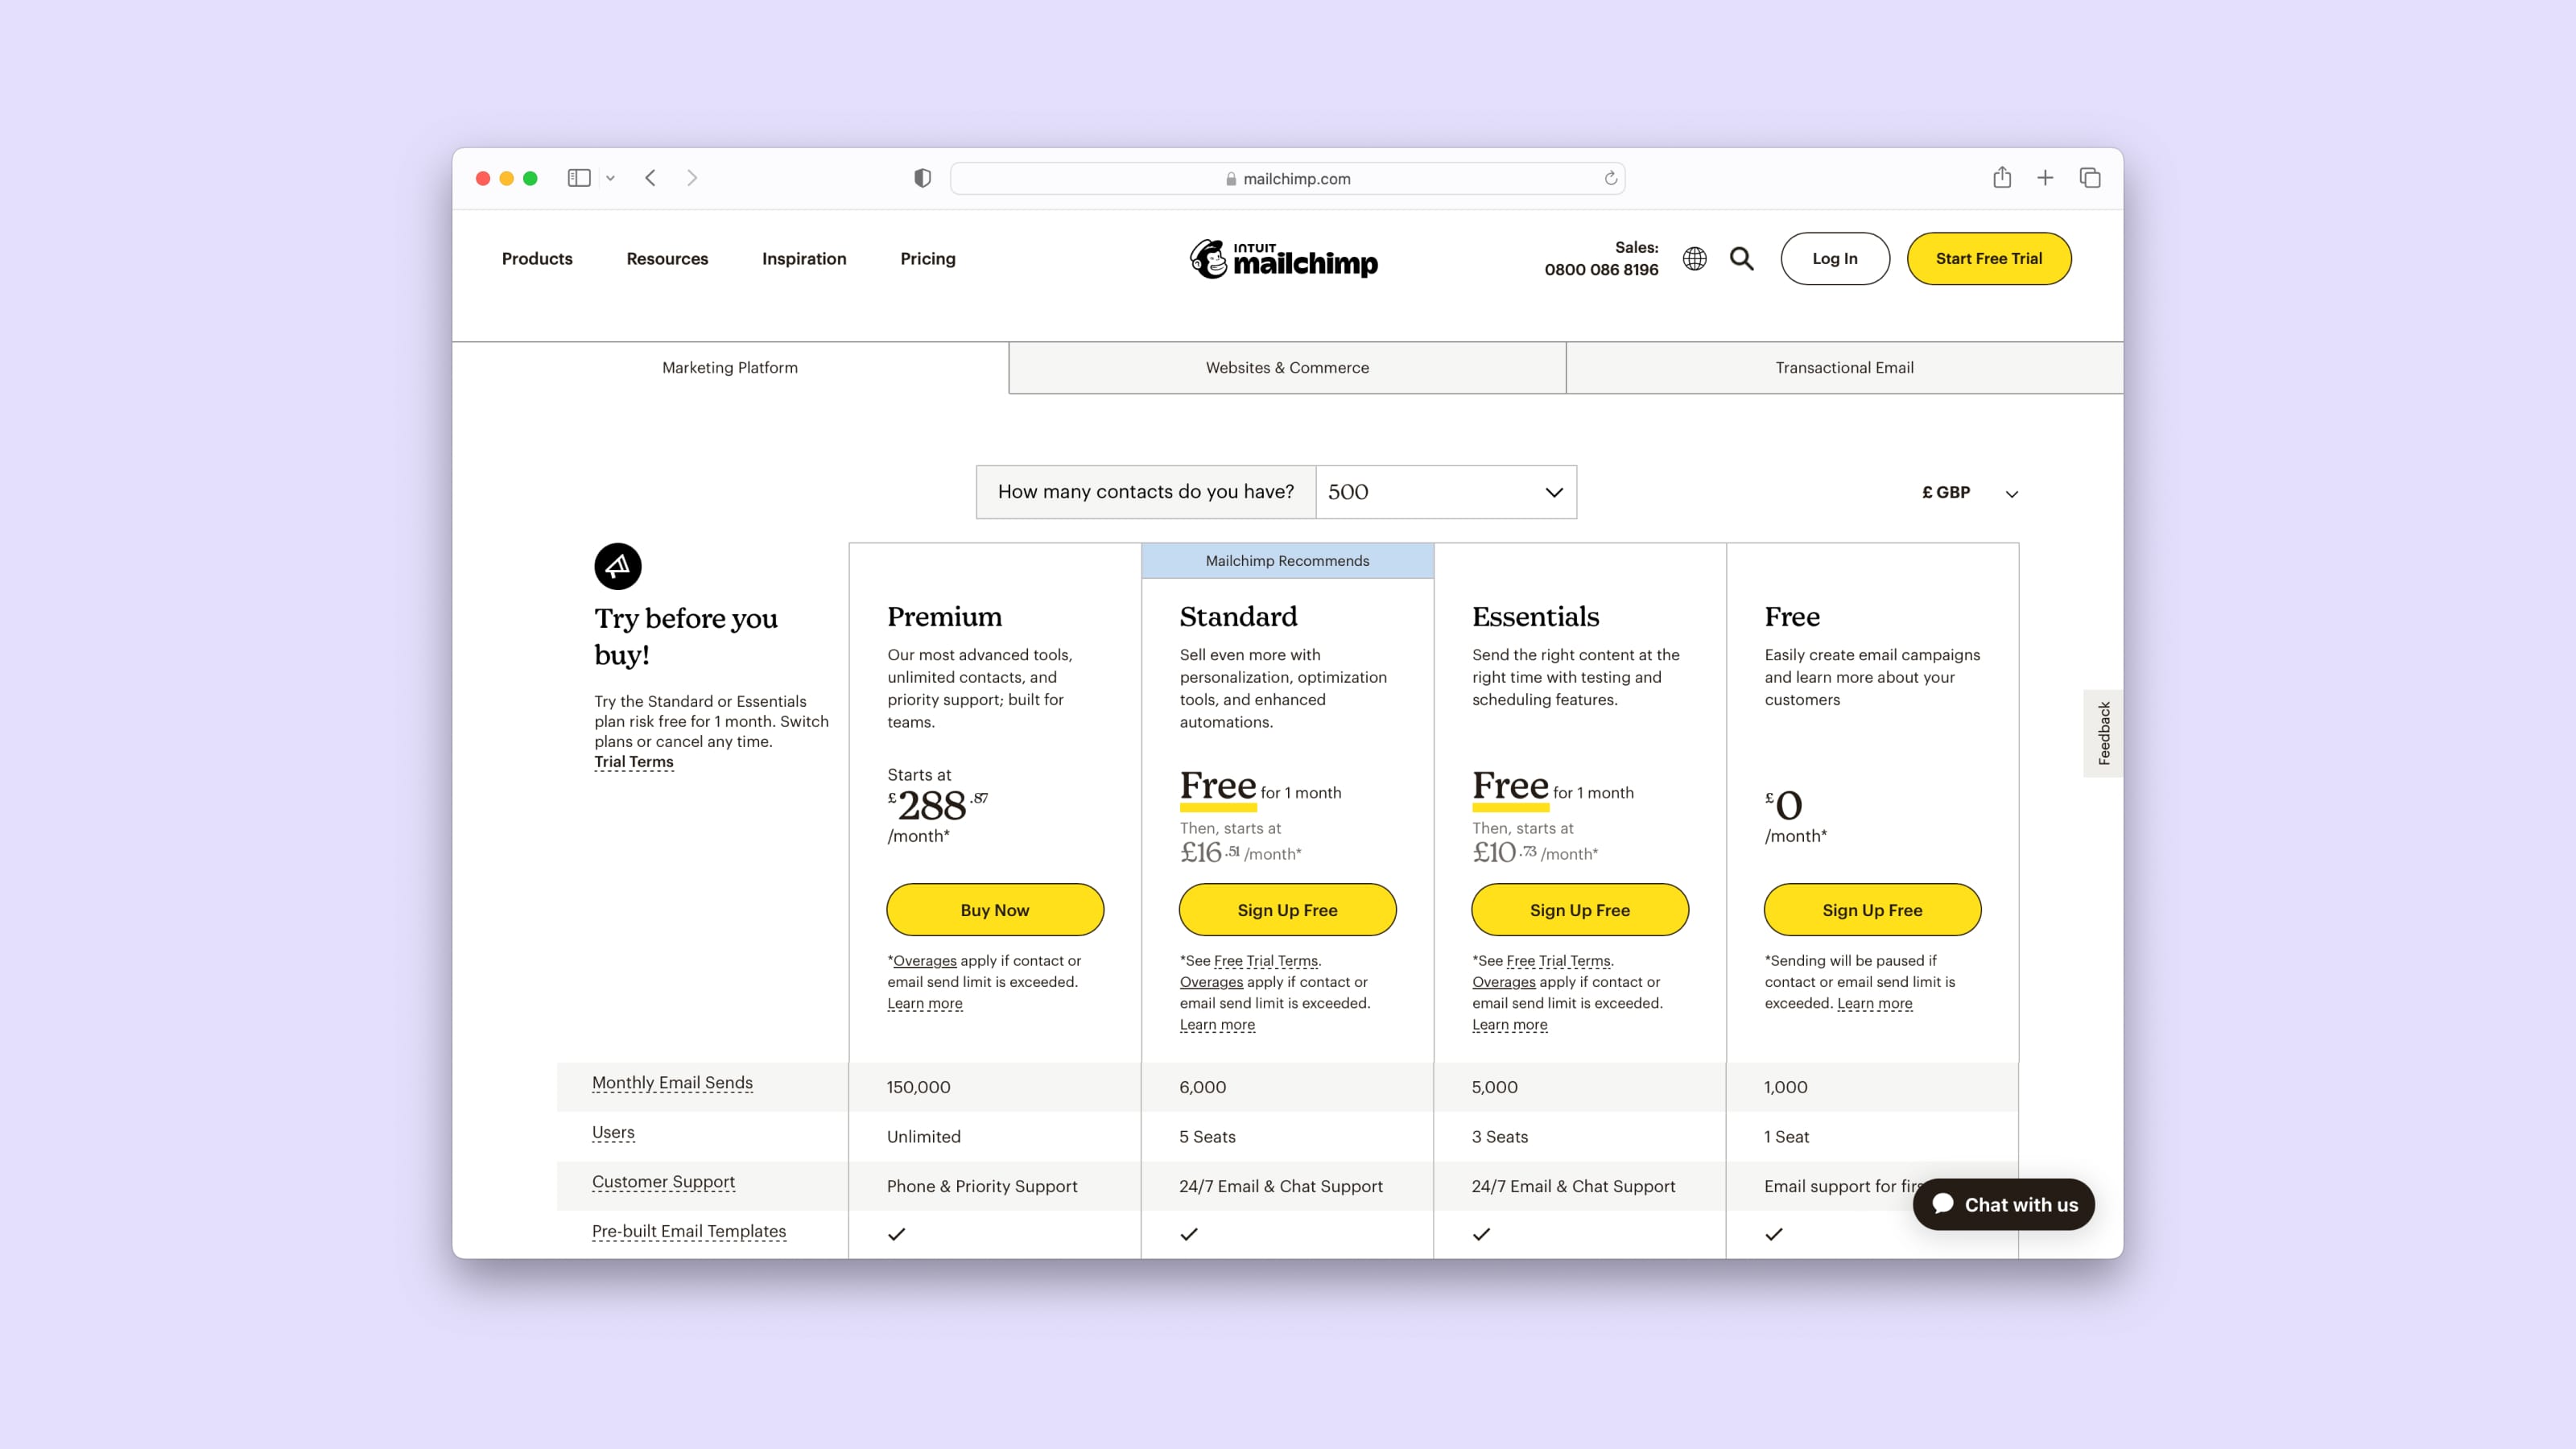 A screenshot of Mailchimp's pricing page